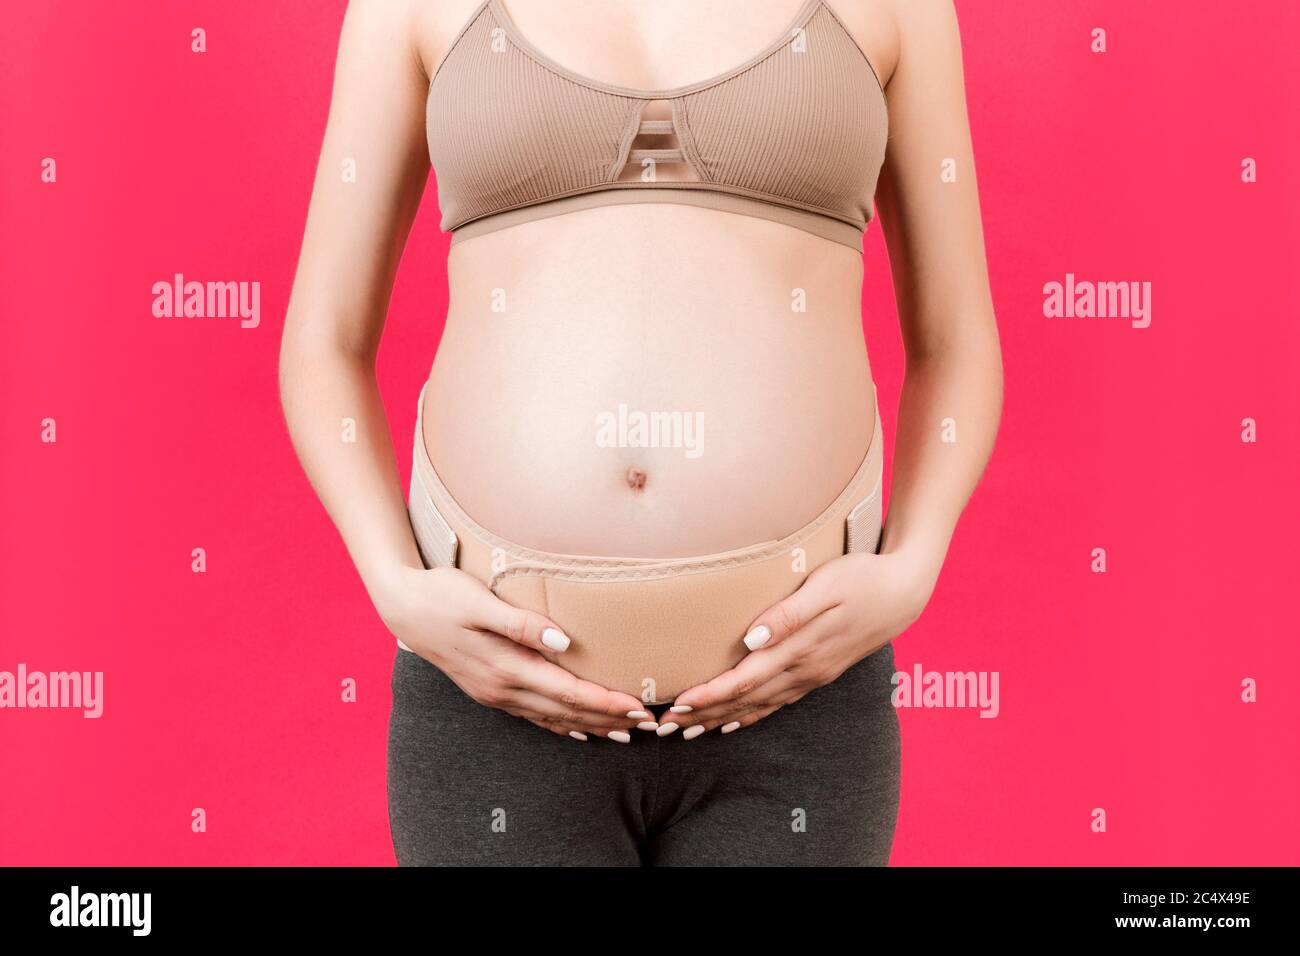 Closeup of pregnant woman wearing maternity girdle. Isolated over